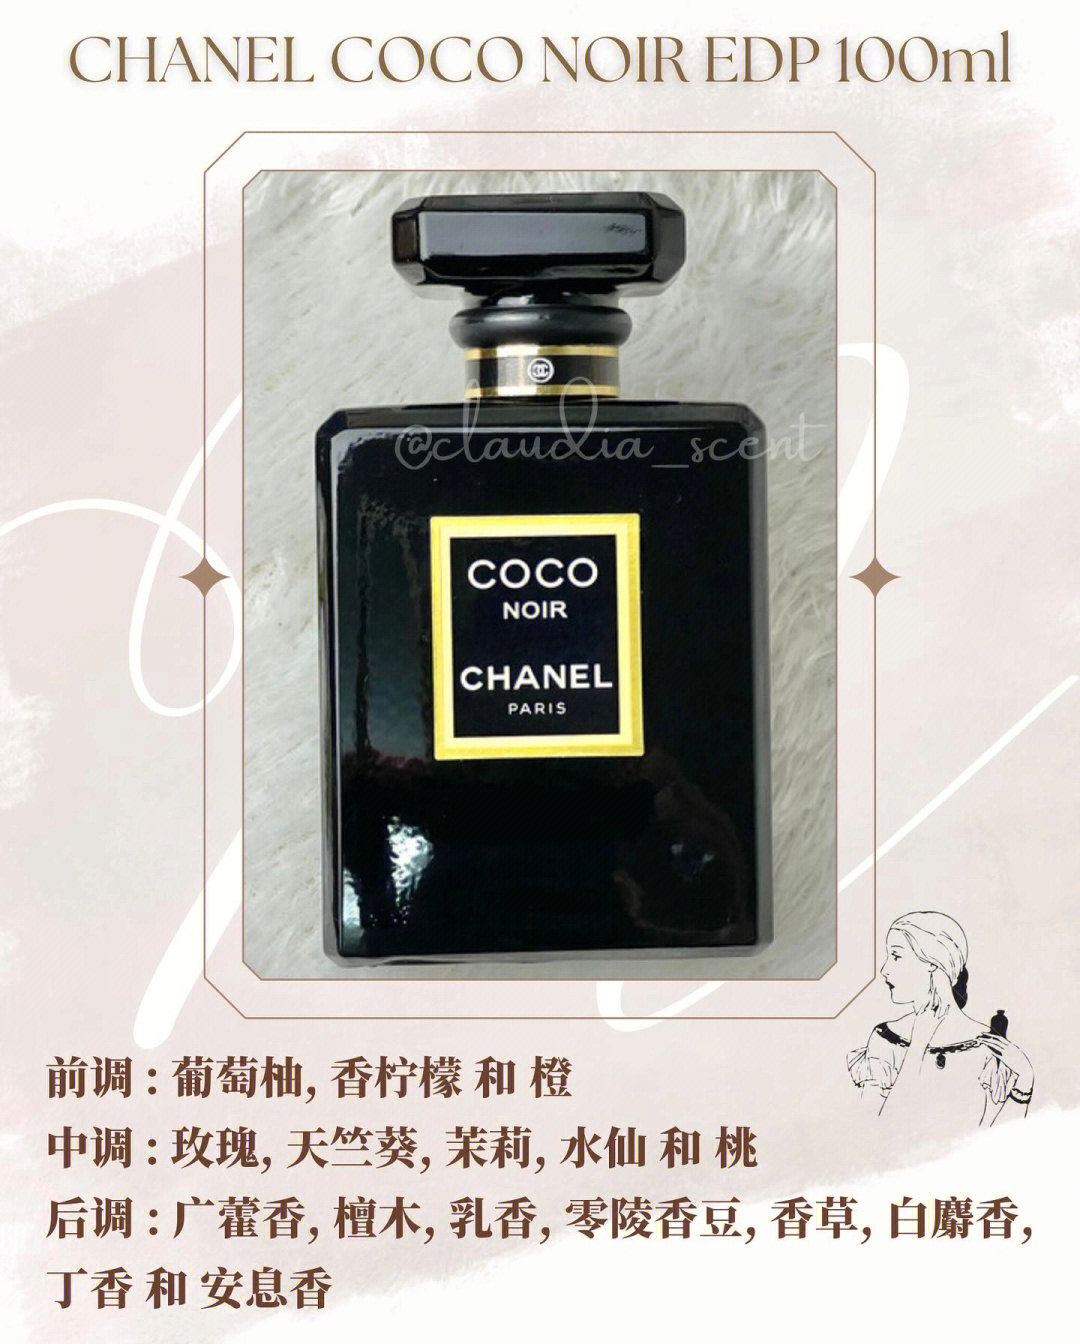 CocoCola黑可乐图片